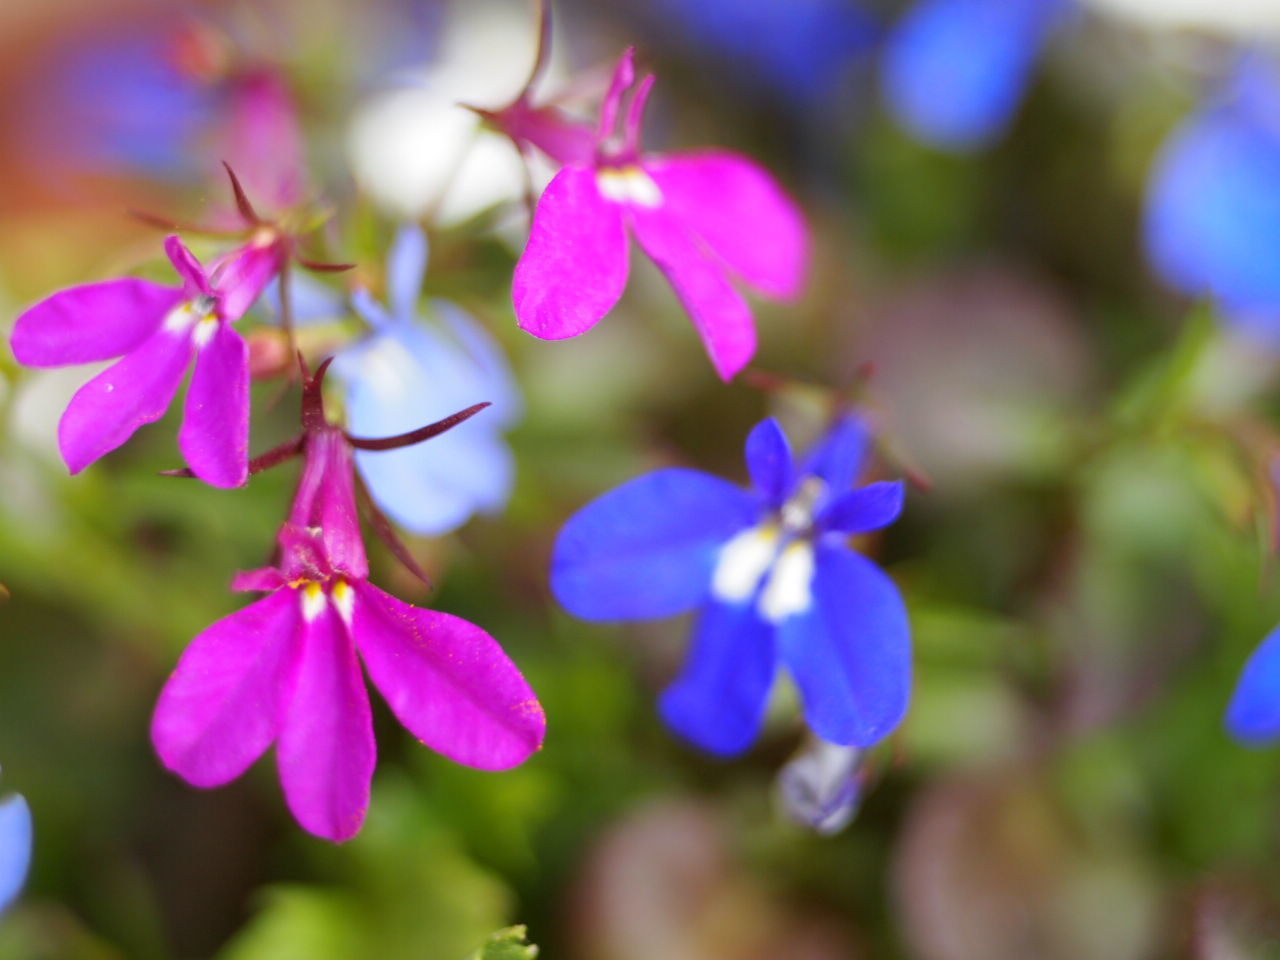 Close-up of pink and purple flowers blooming outdoors